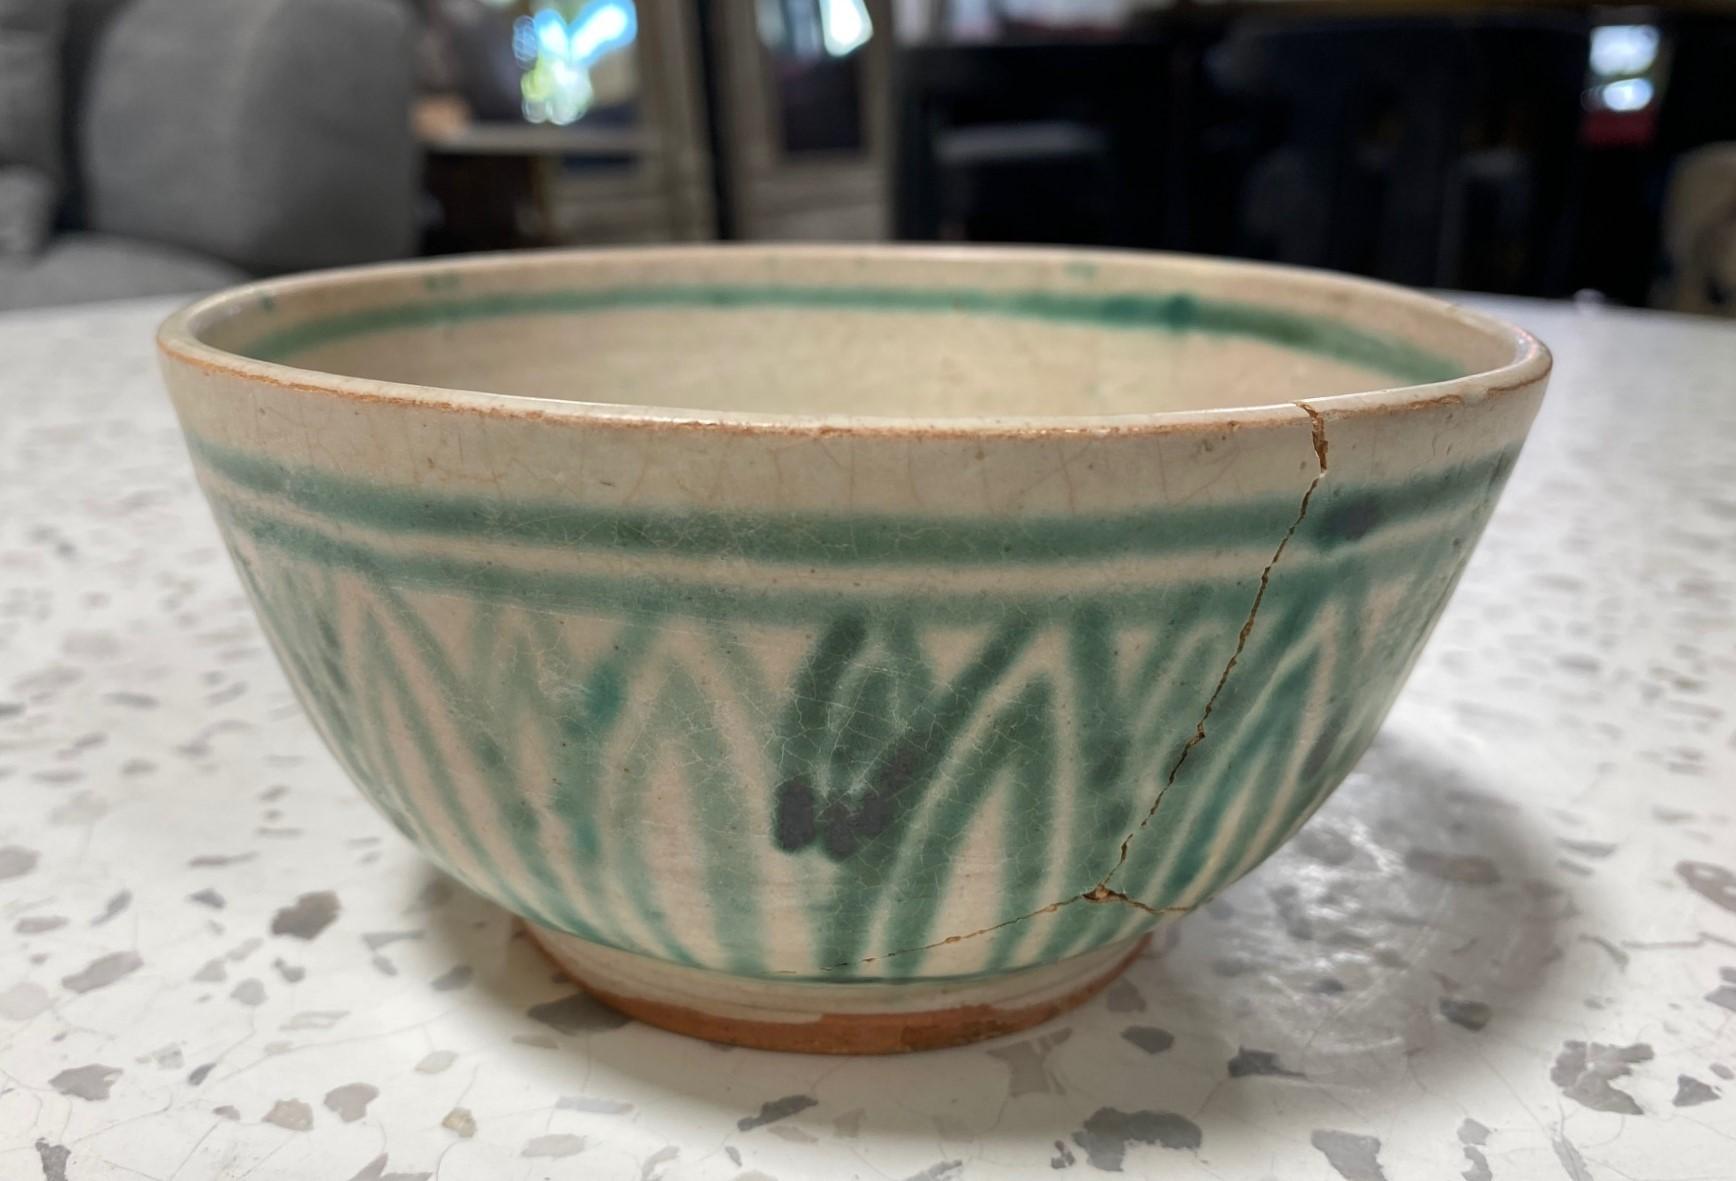 18th Century and Earlier 15th Century Antique Burma 'Myanmar' Burmese Green & White Pottery Ceramic Bowl For Sale